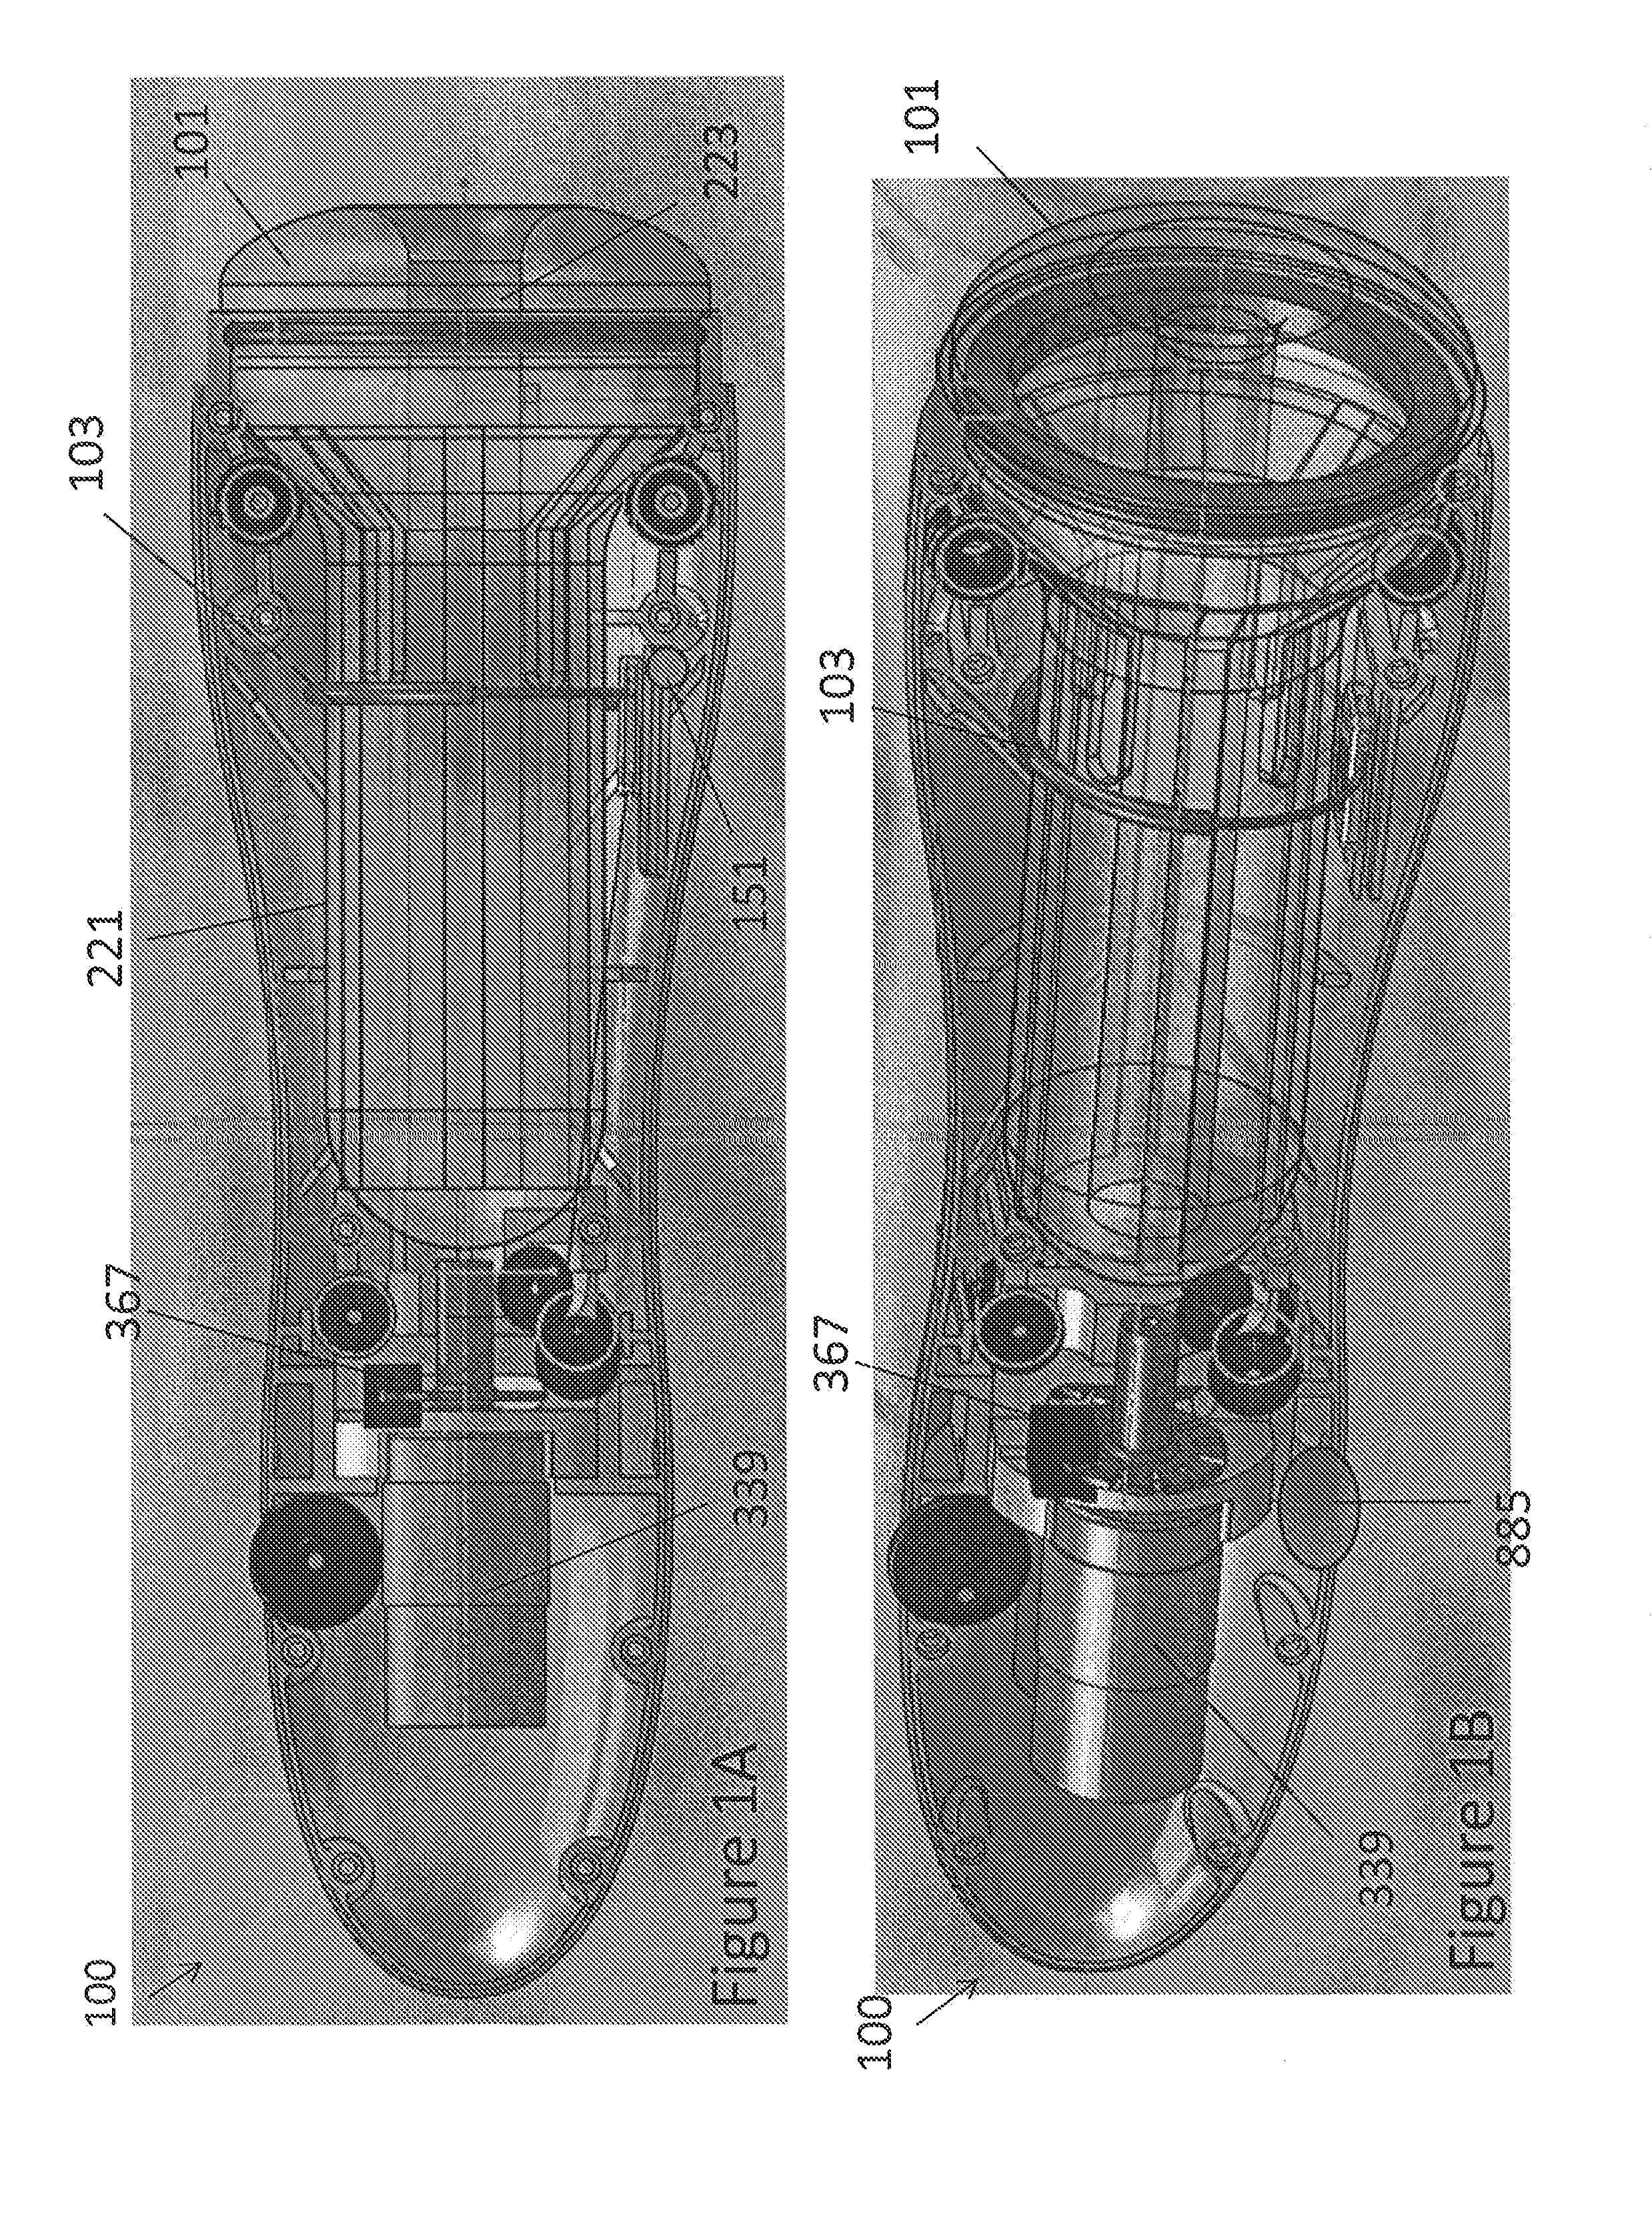 Systems and methods for haptic stimulation